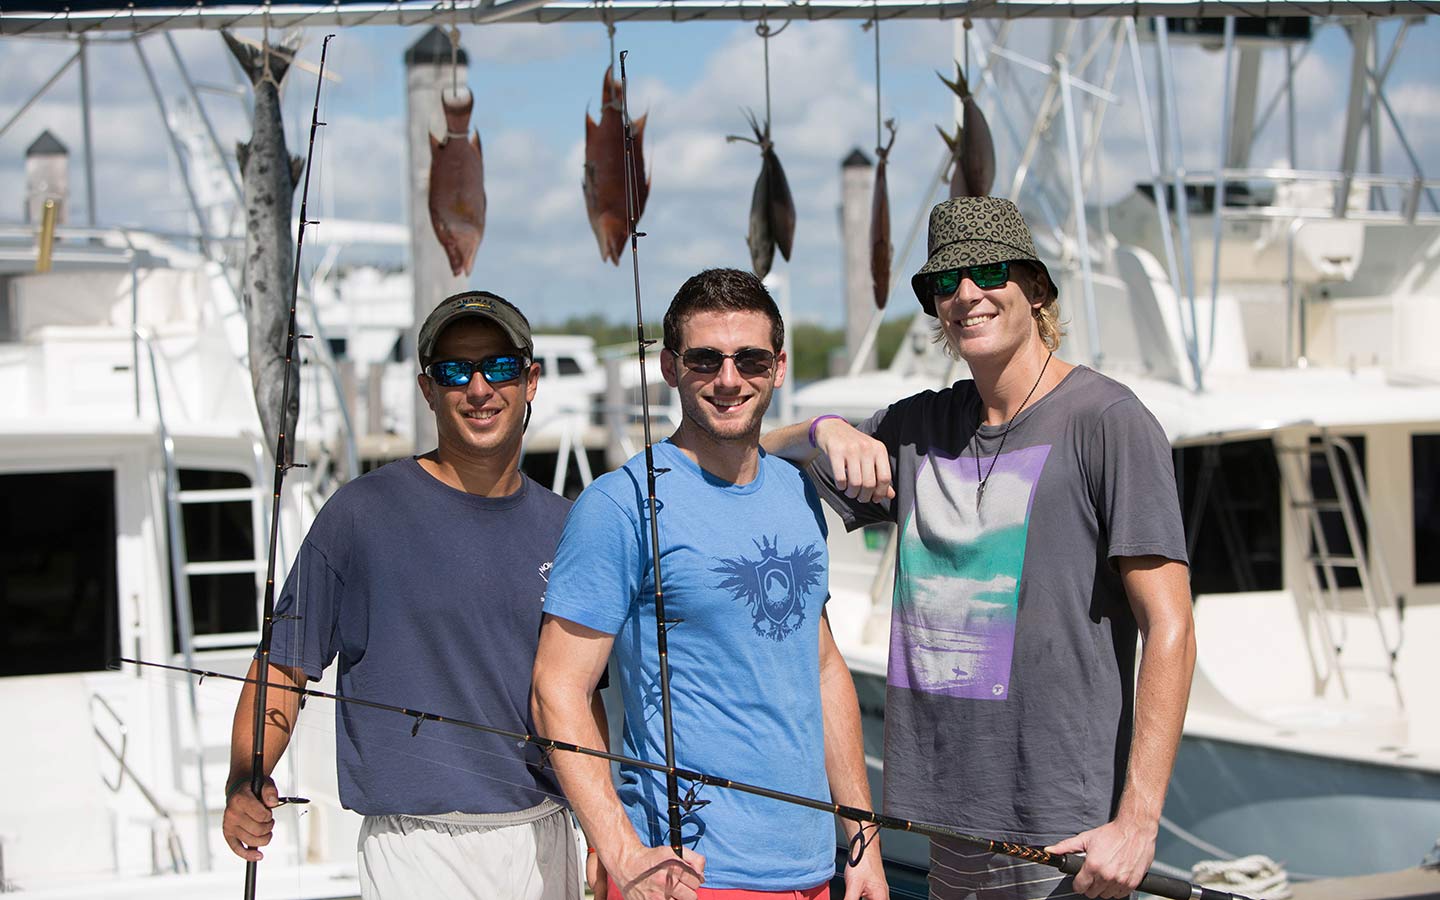 Fishing charter group showing off their catch